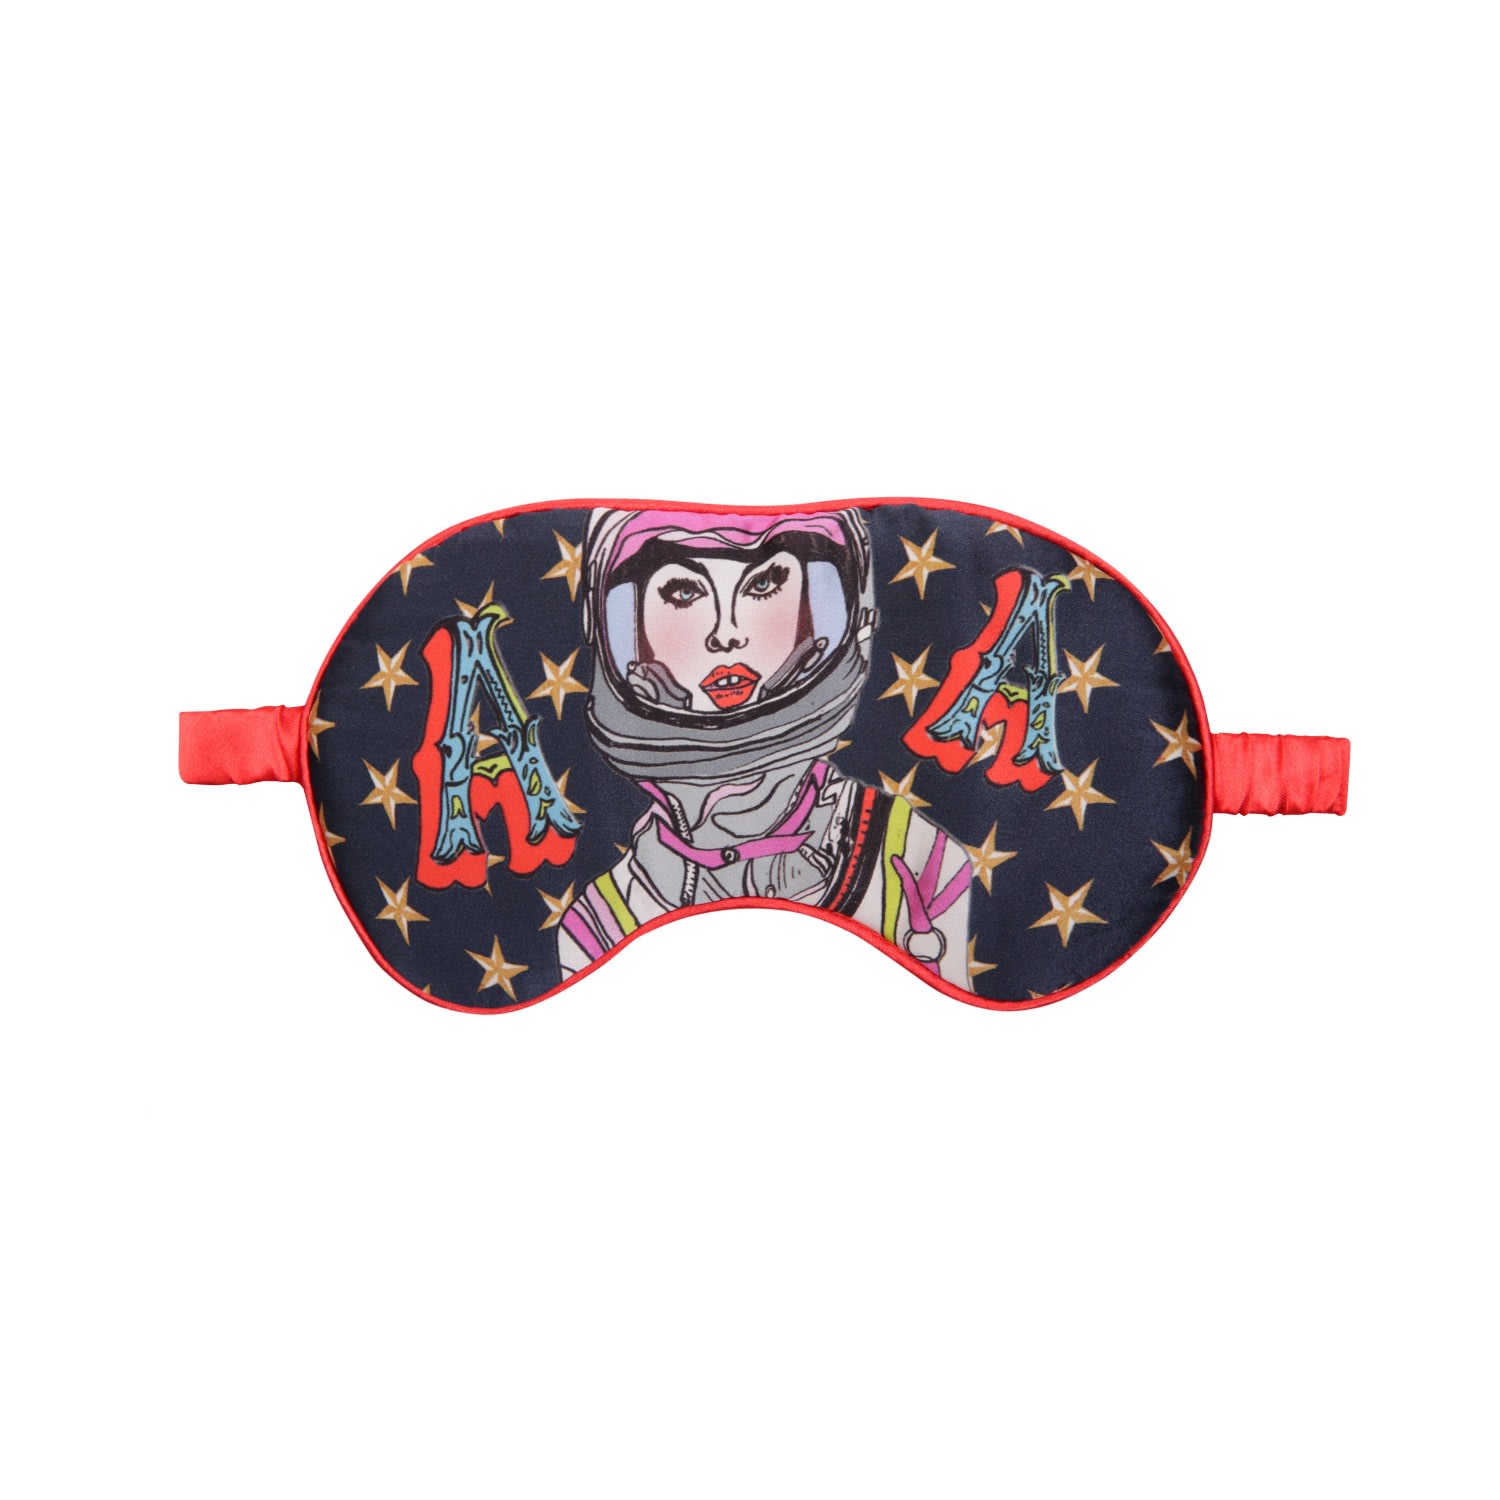 A For Astronaut - Multicolour One Size Jessica Russell Flint